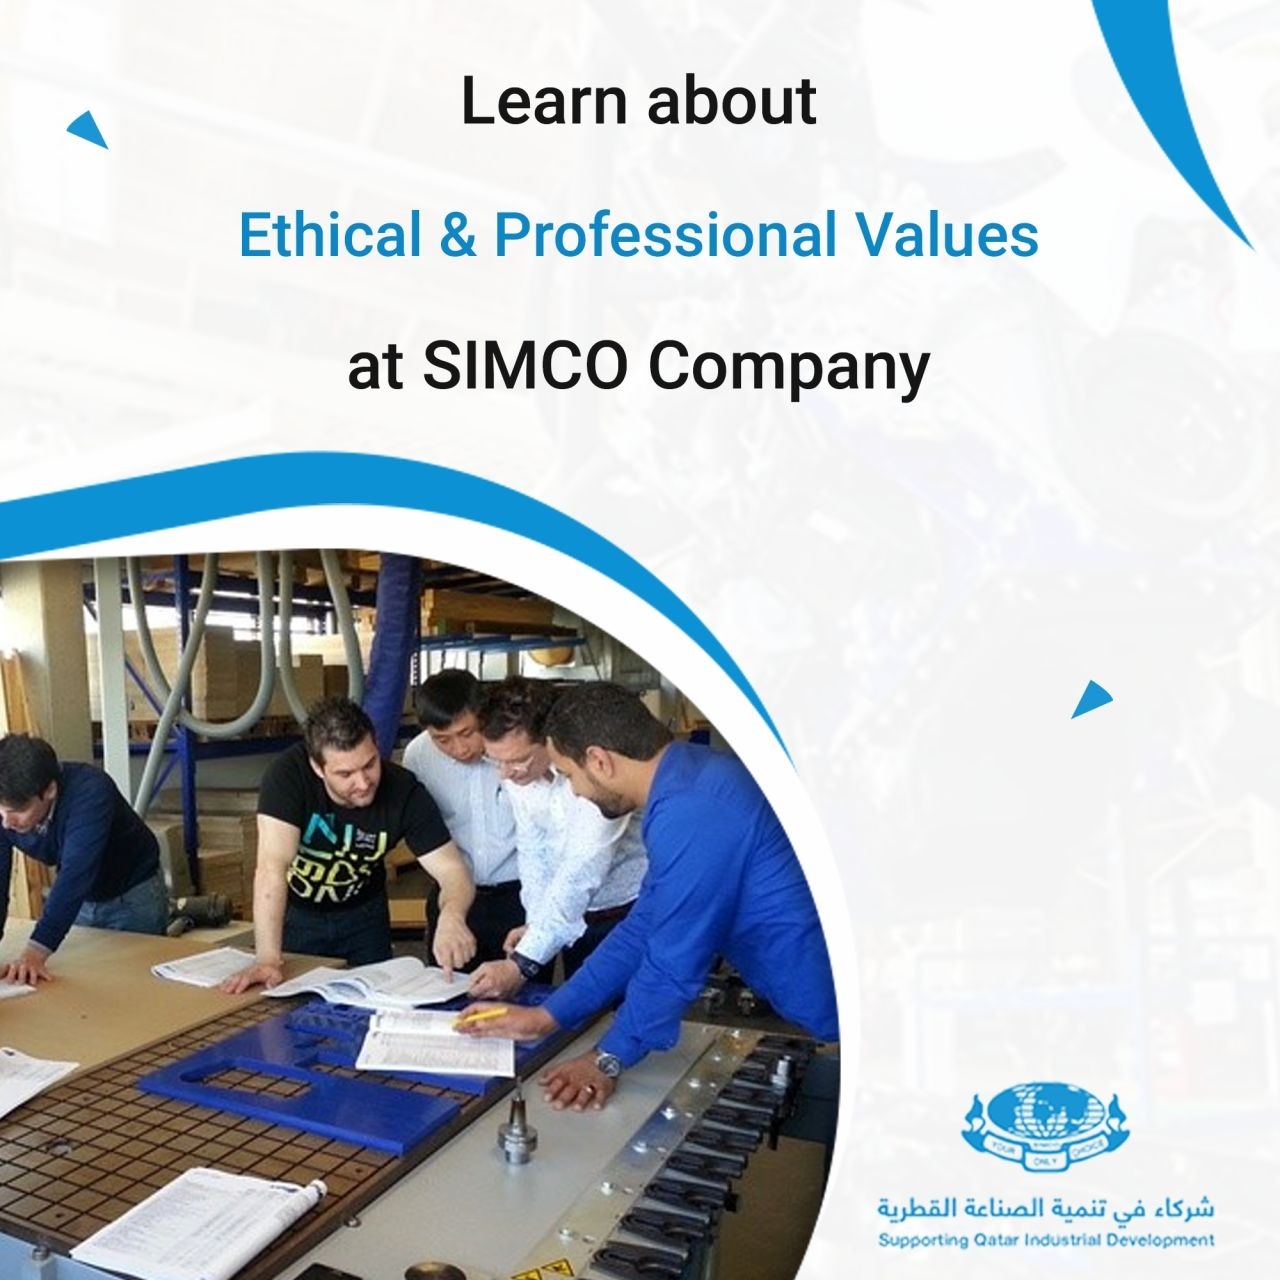 Learn about Ethical & Professional Values at SIMCO Company